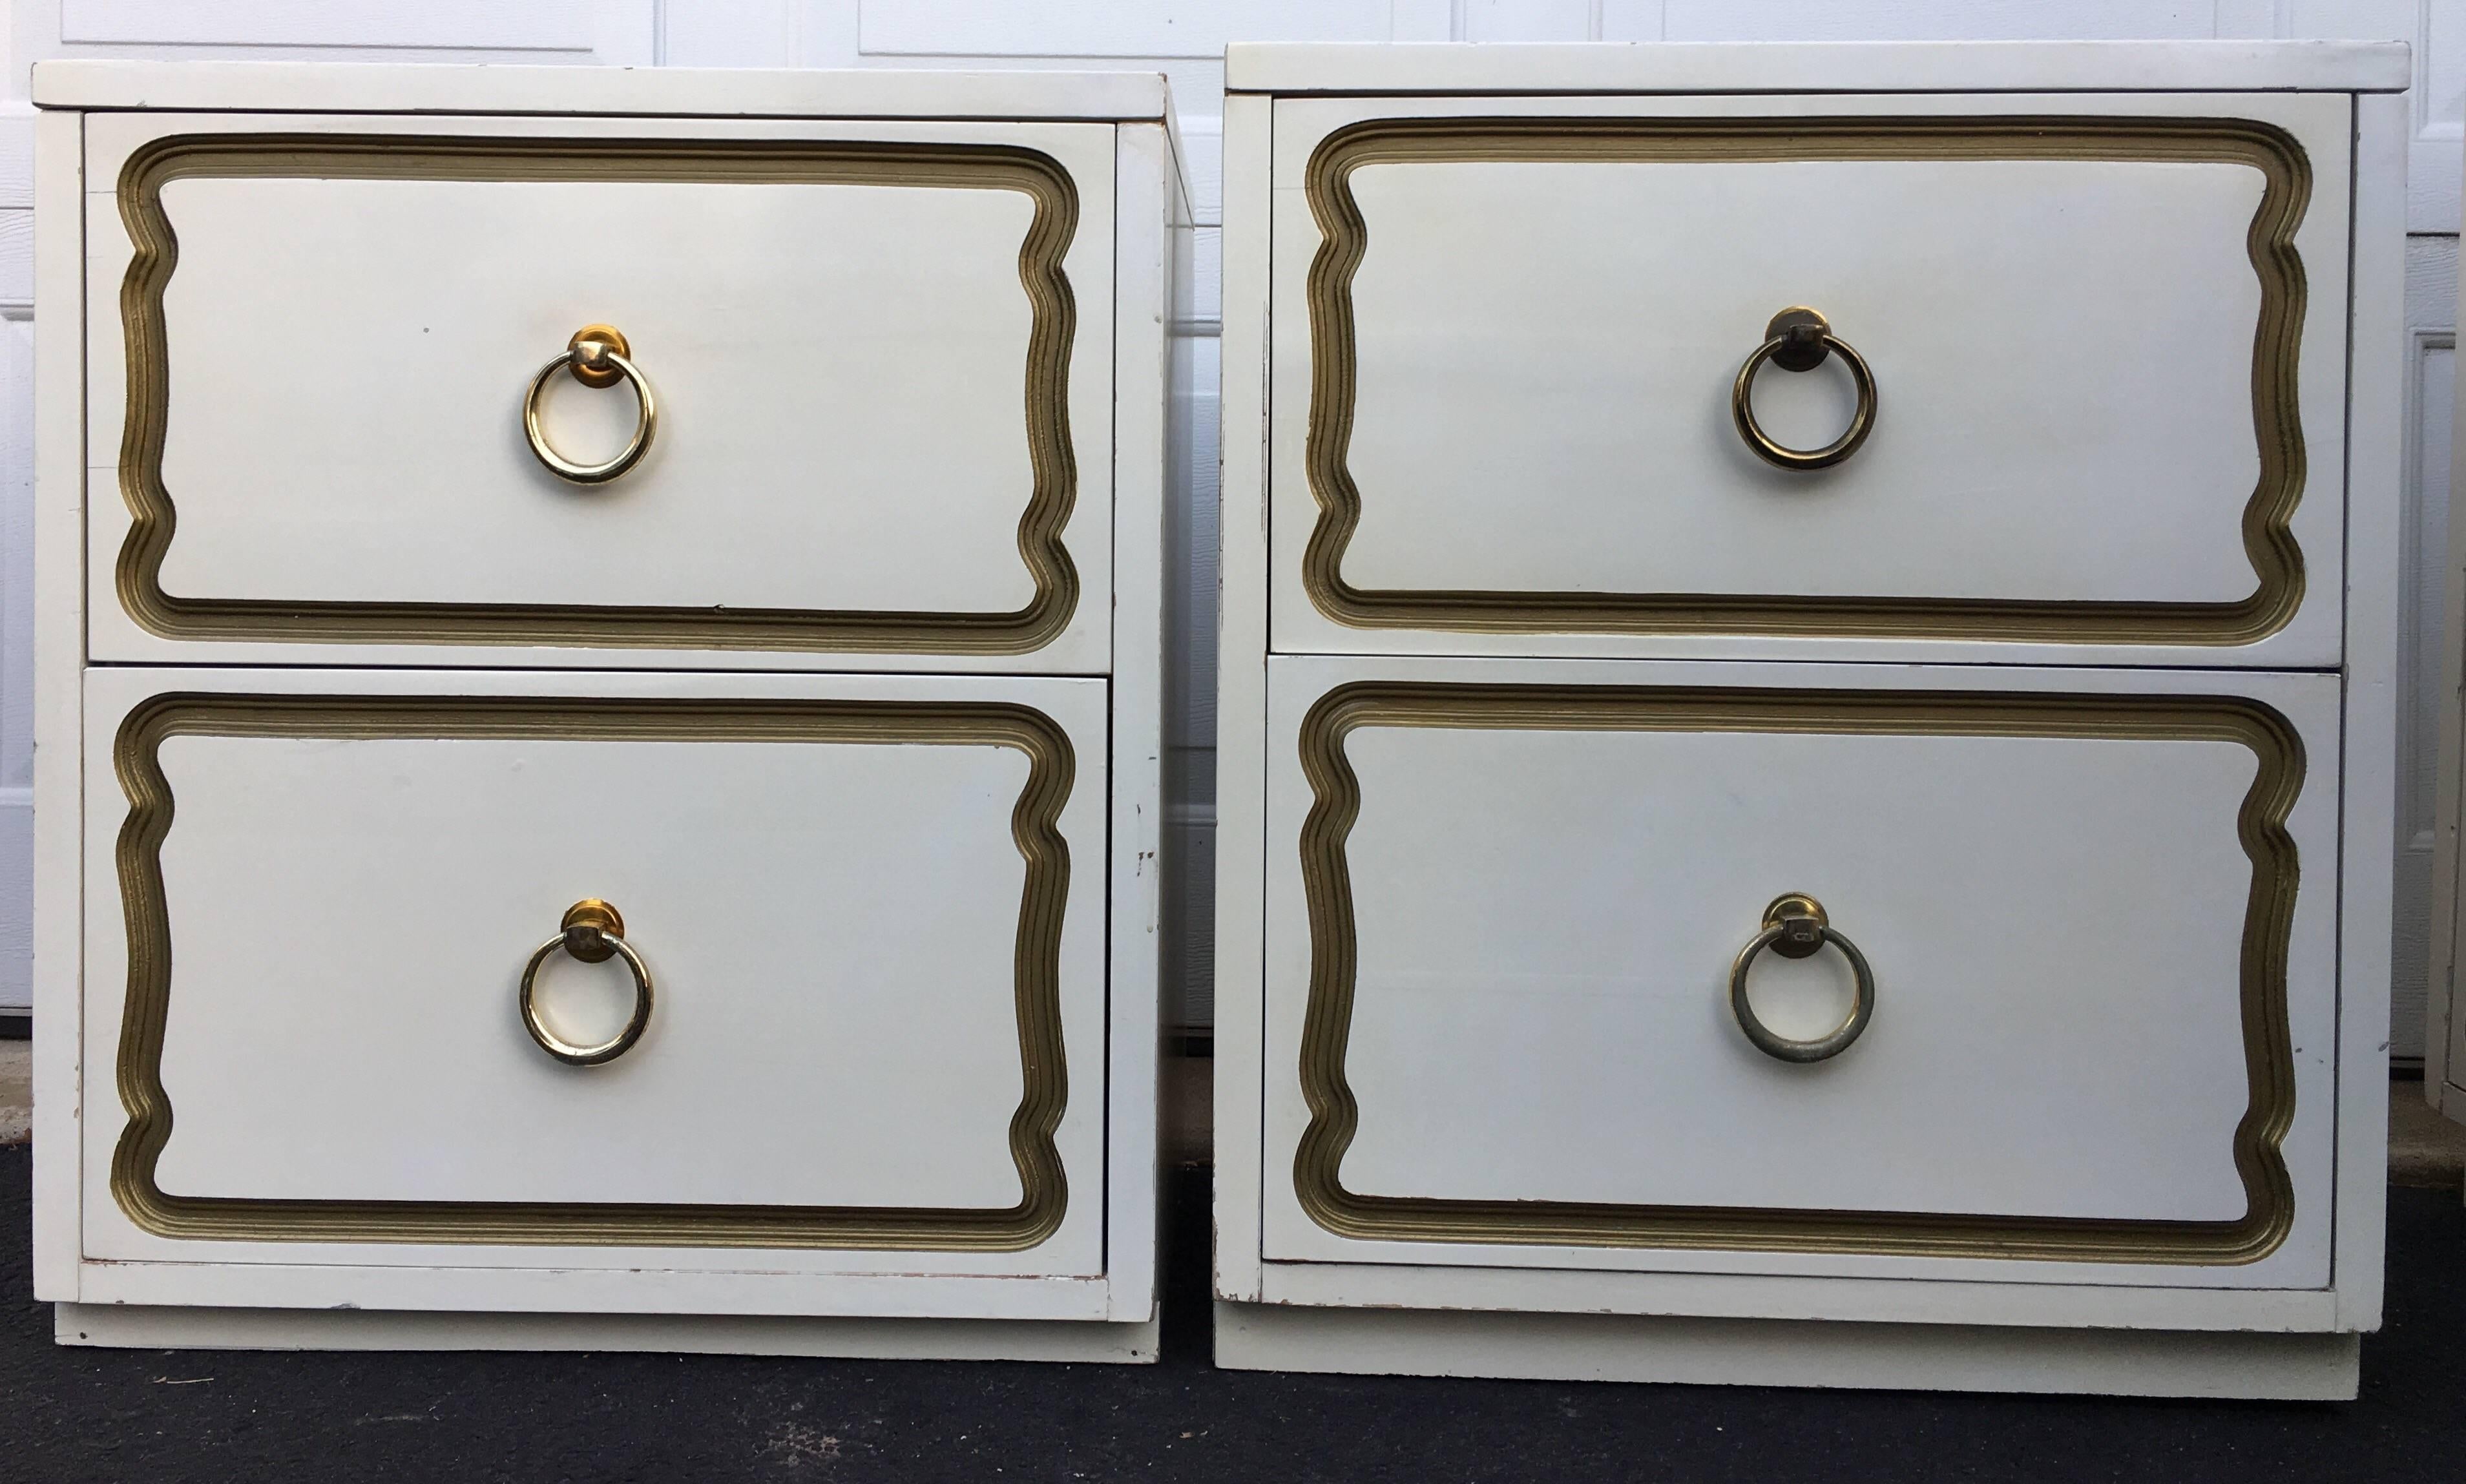 Rare pair of Mid-Century Modern Dorothy Draper Espana for Henredon Heritage style bedside tables. These Hollywood Regency two-drawer nightstands feature original white/cream lacquer finish with carved gold leaf detailing and brass ring